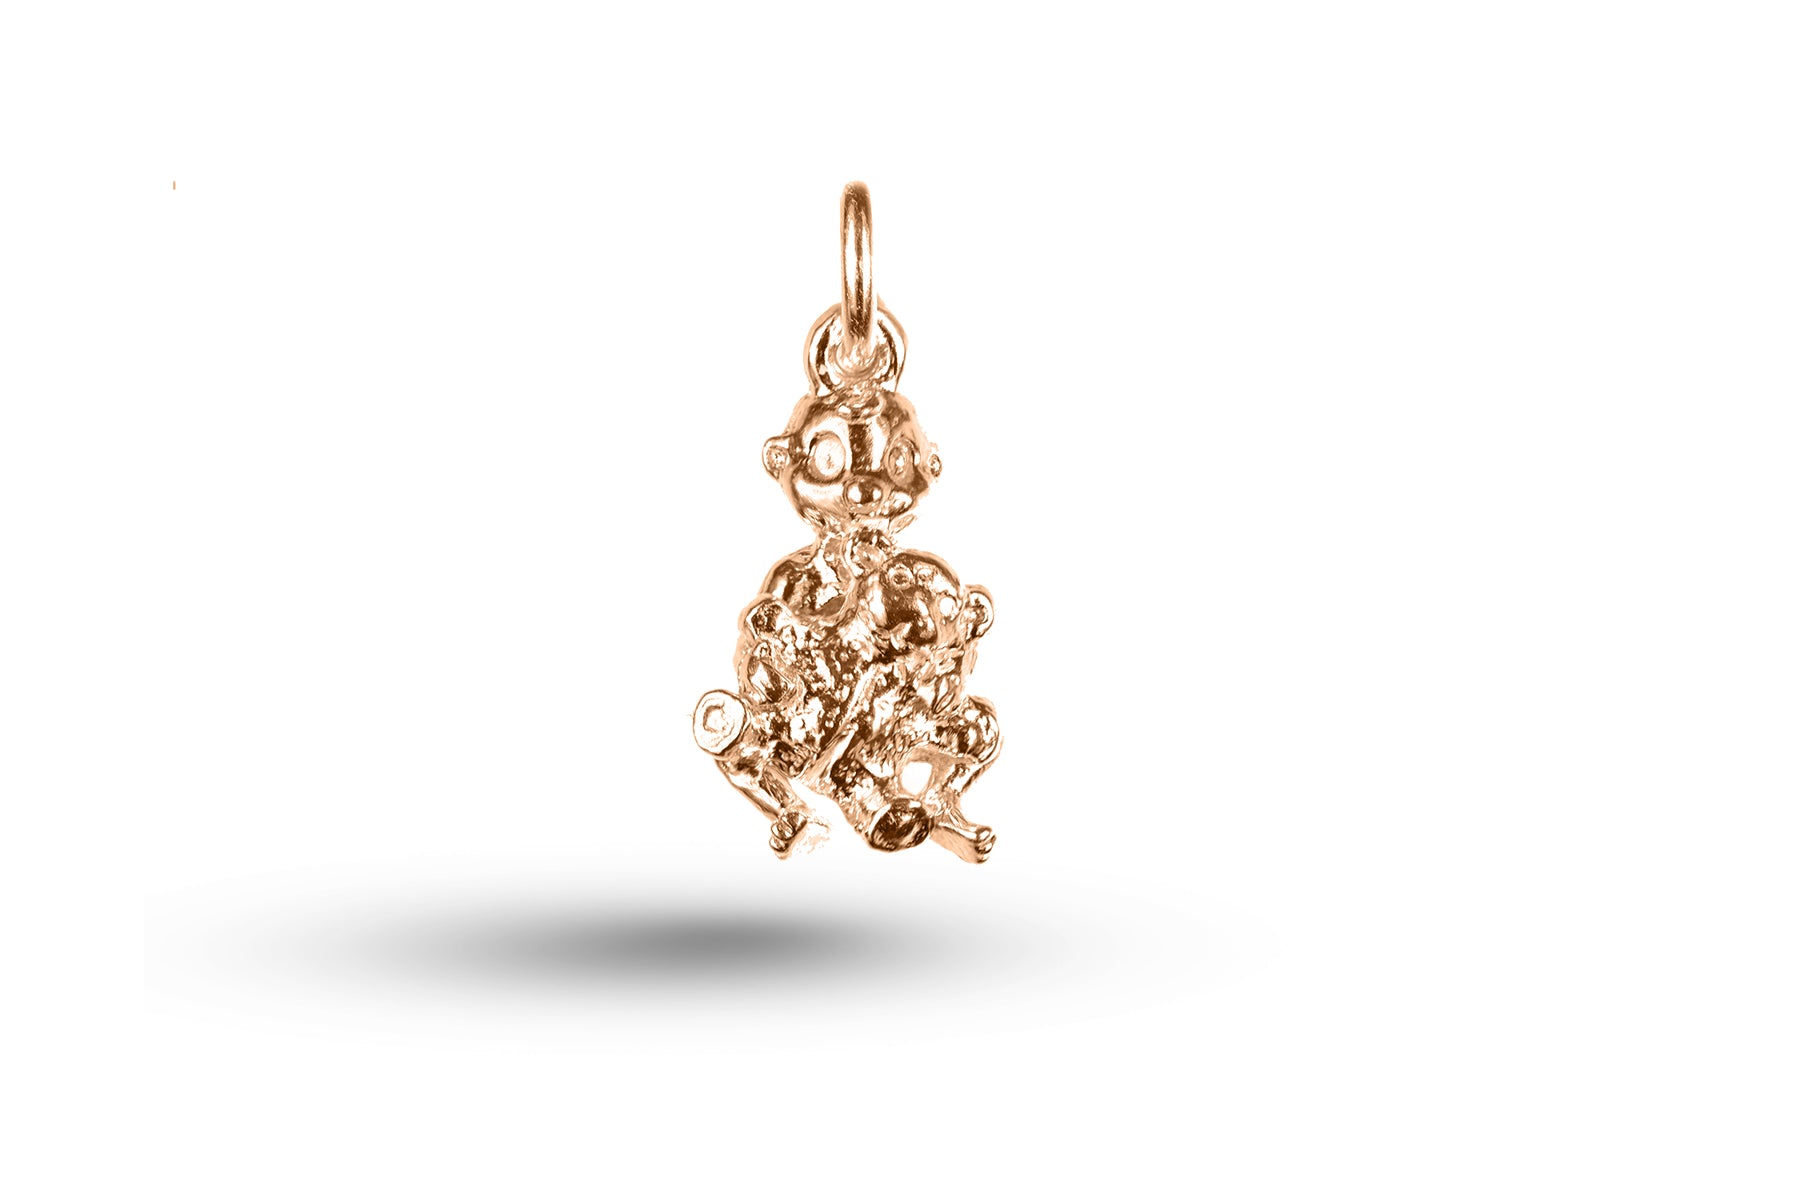 Luxury rose gold baby and teddy bear charm.